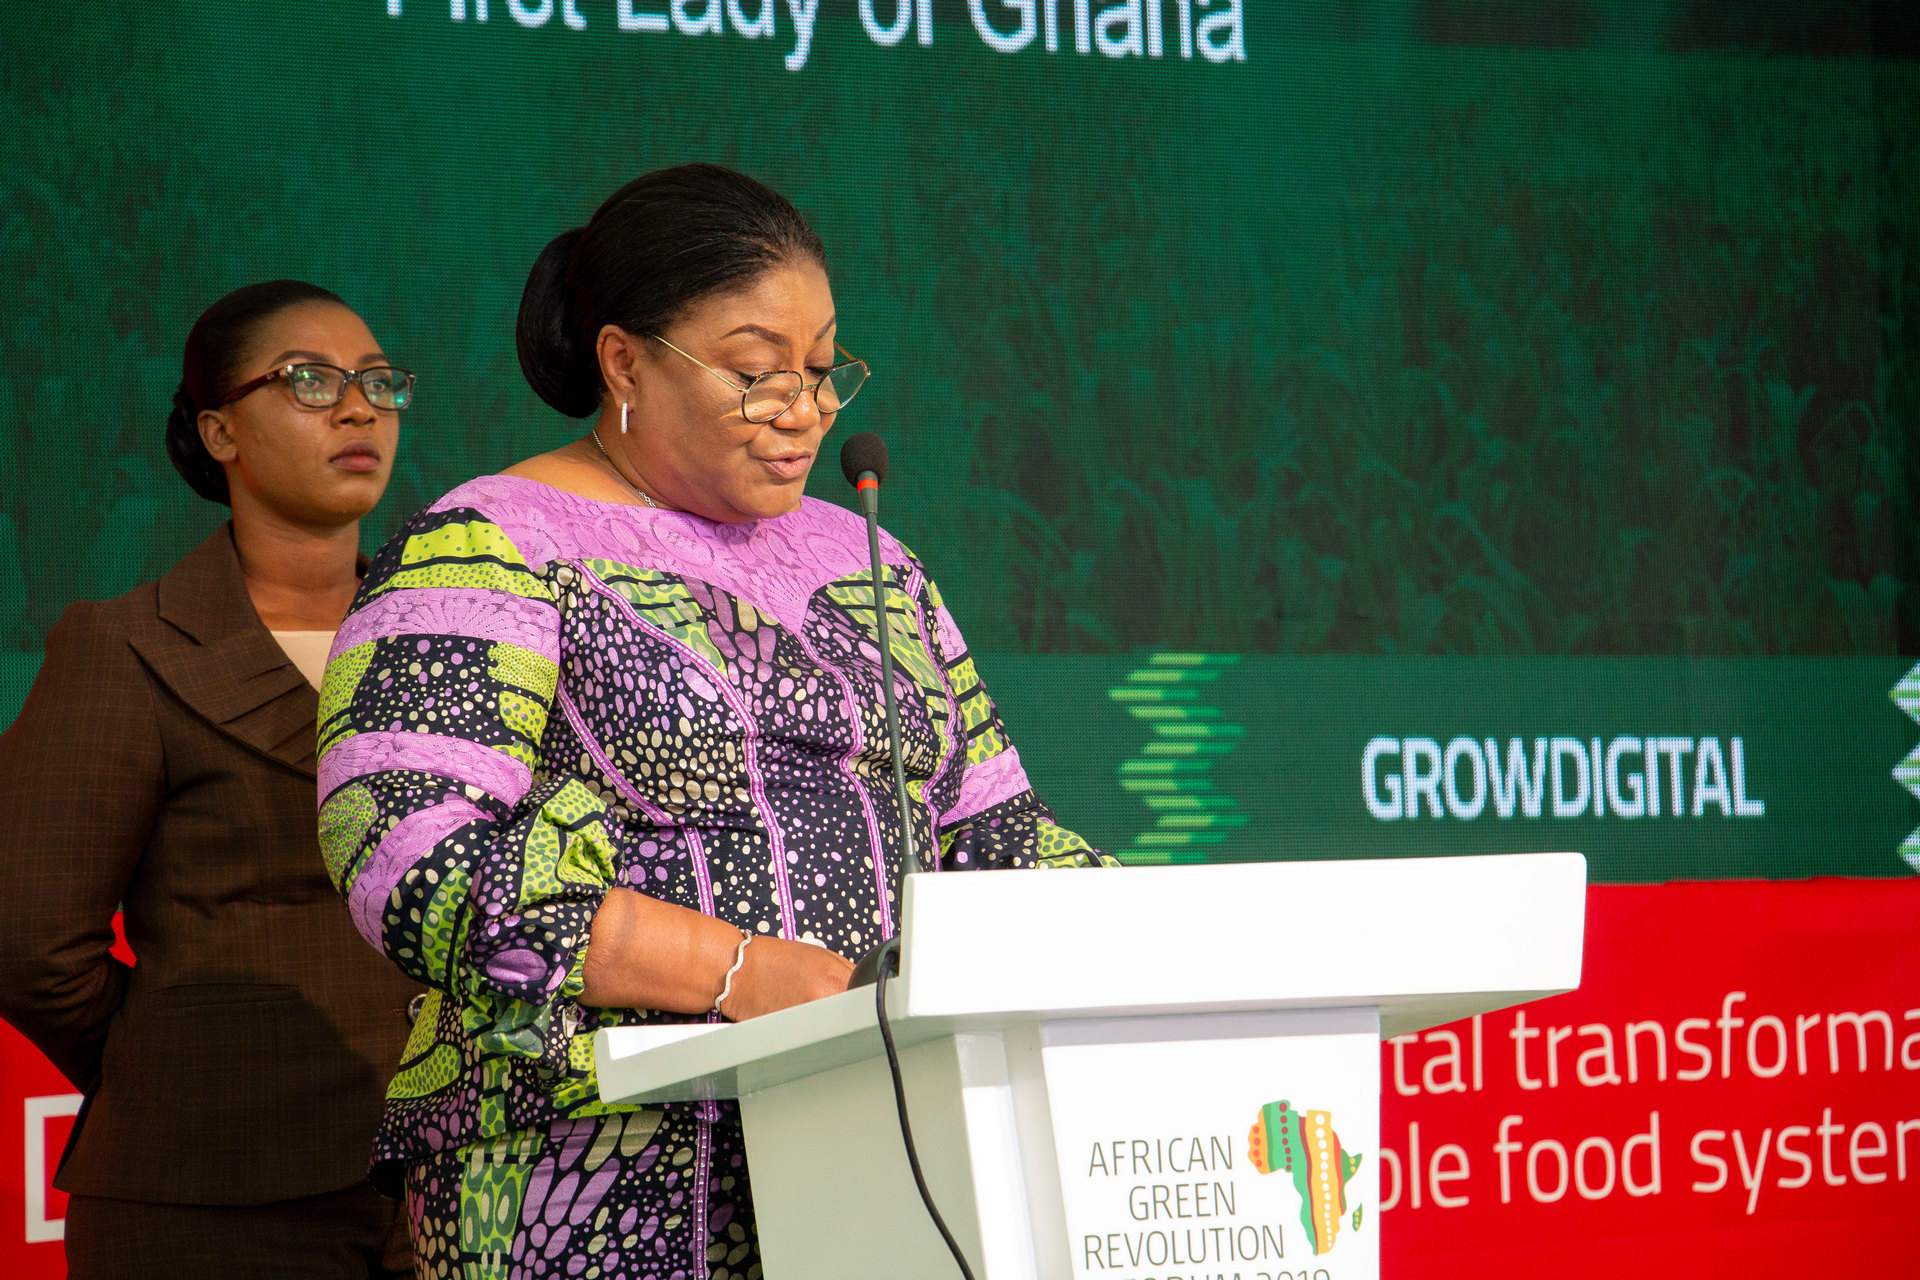 Women leaders in Africa vow to end malnutrition using best tested strategies